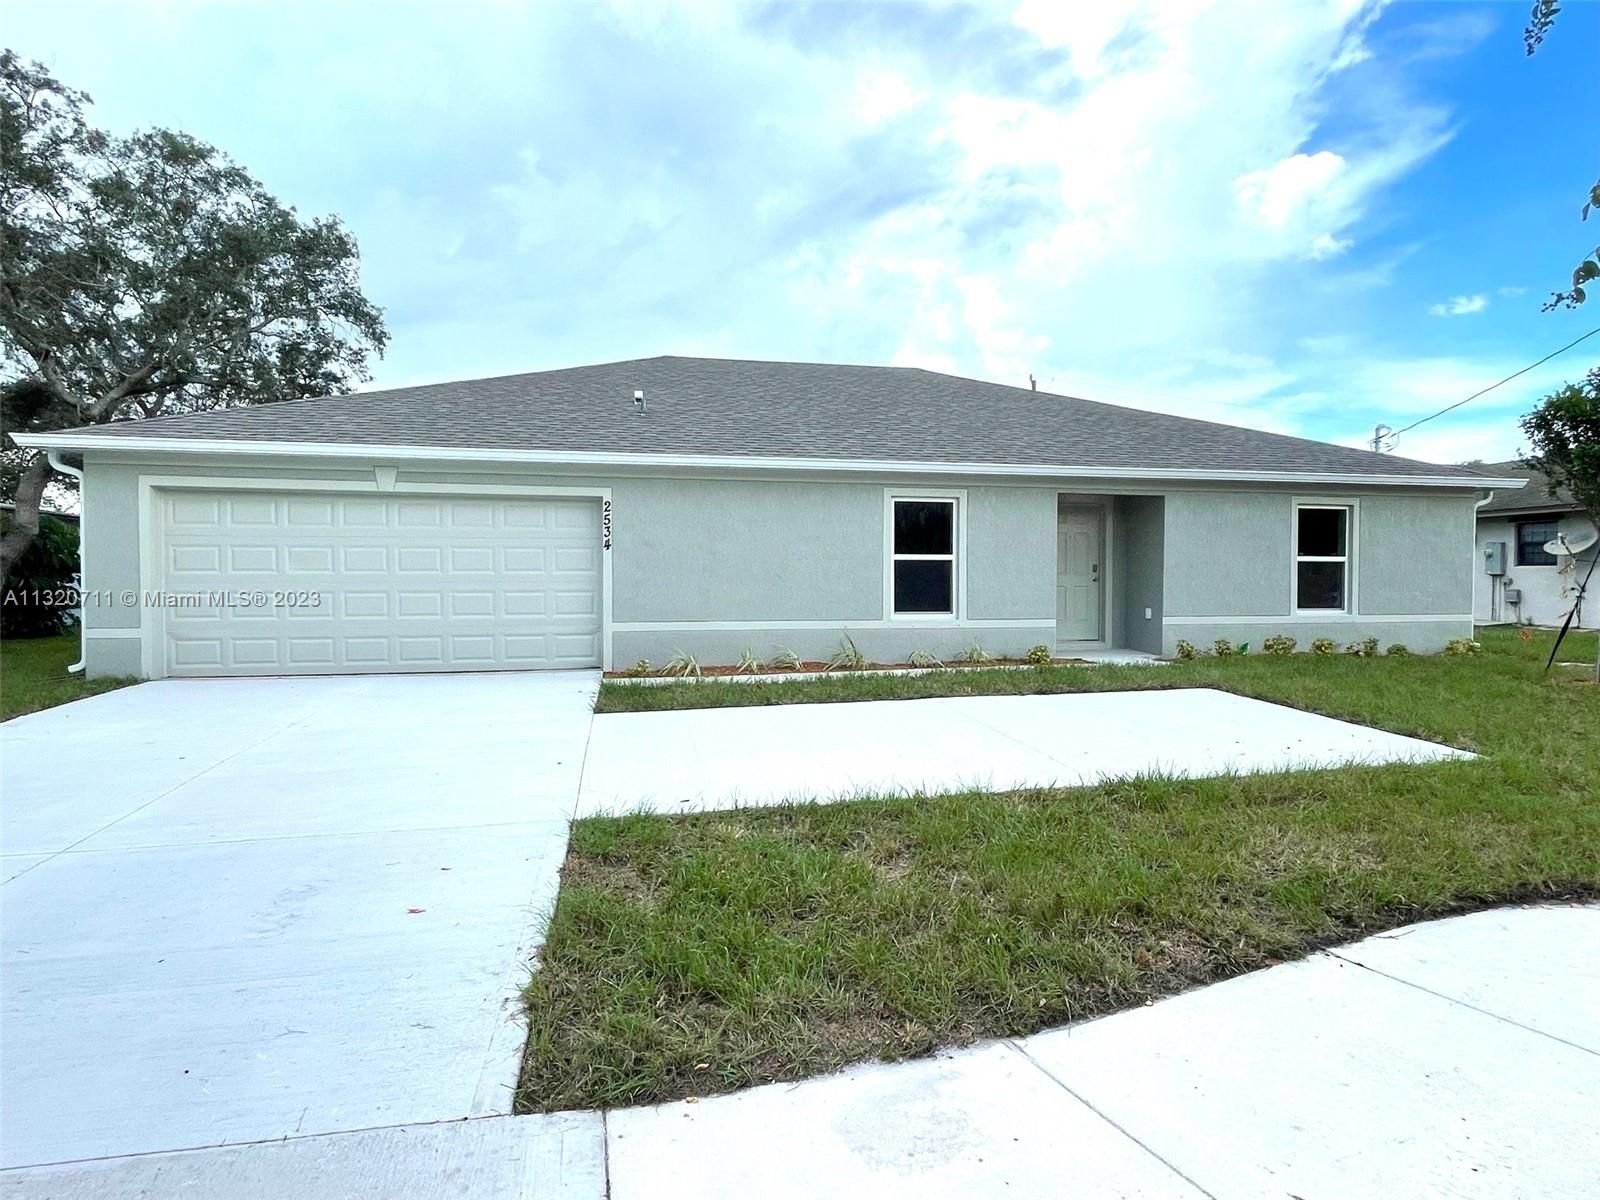 Real estate property located at 2534 Floresta Dr, St Lucie County, Port St. Lucie, FL